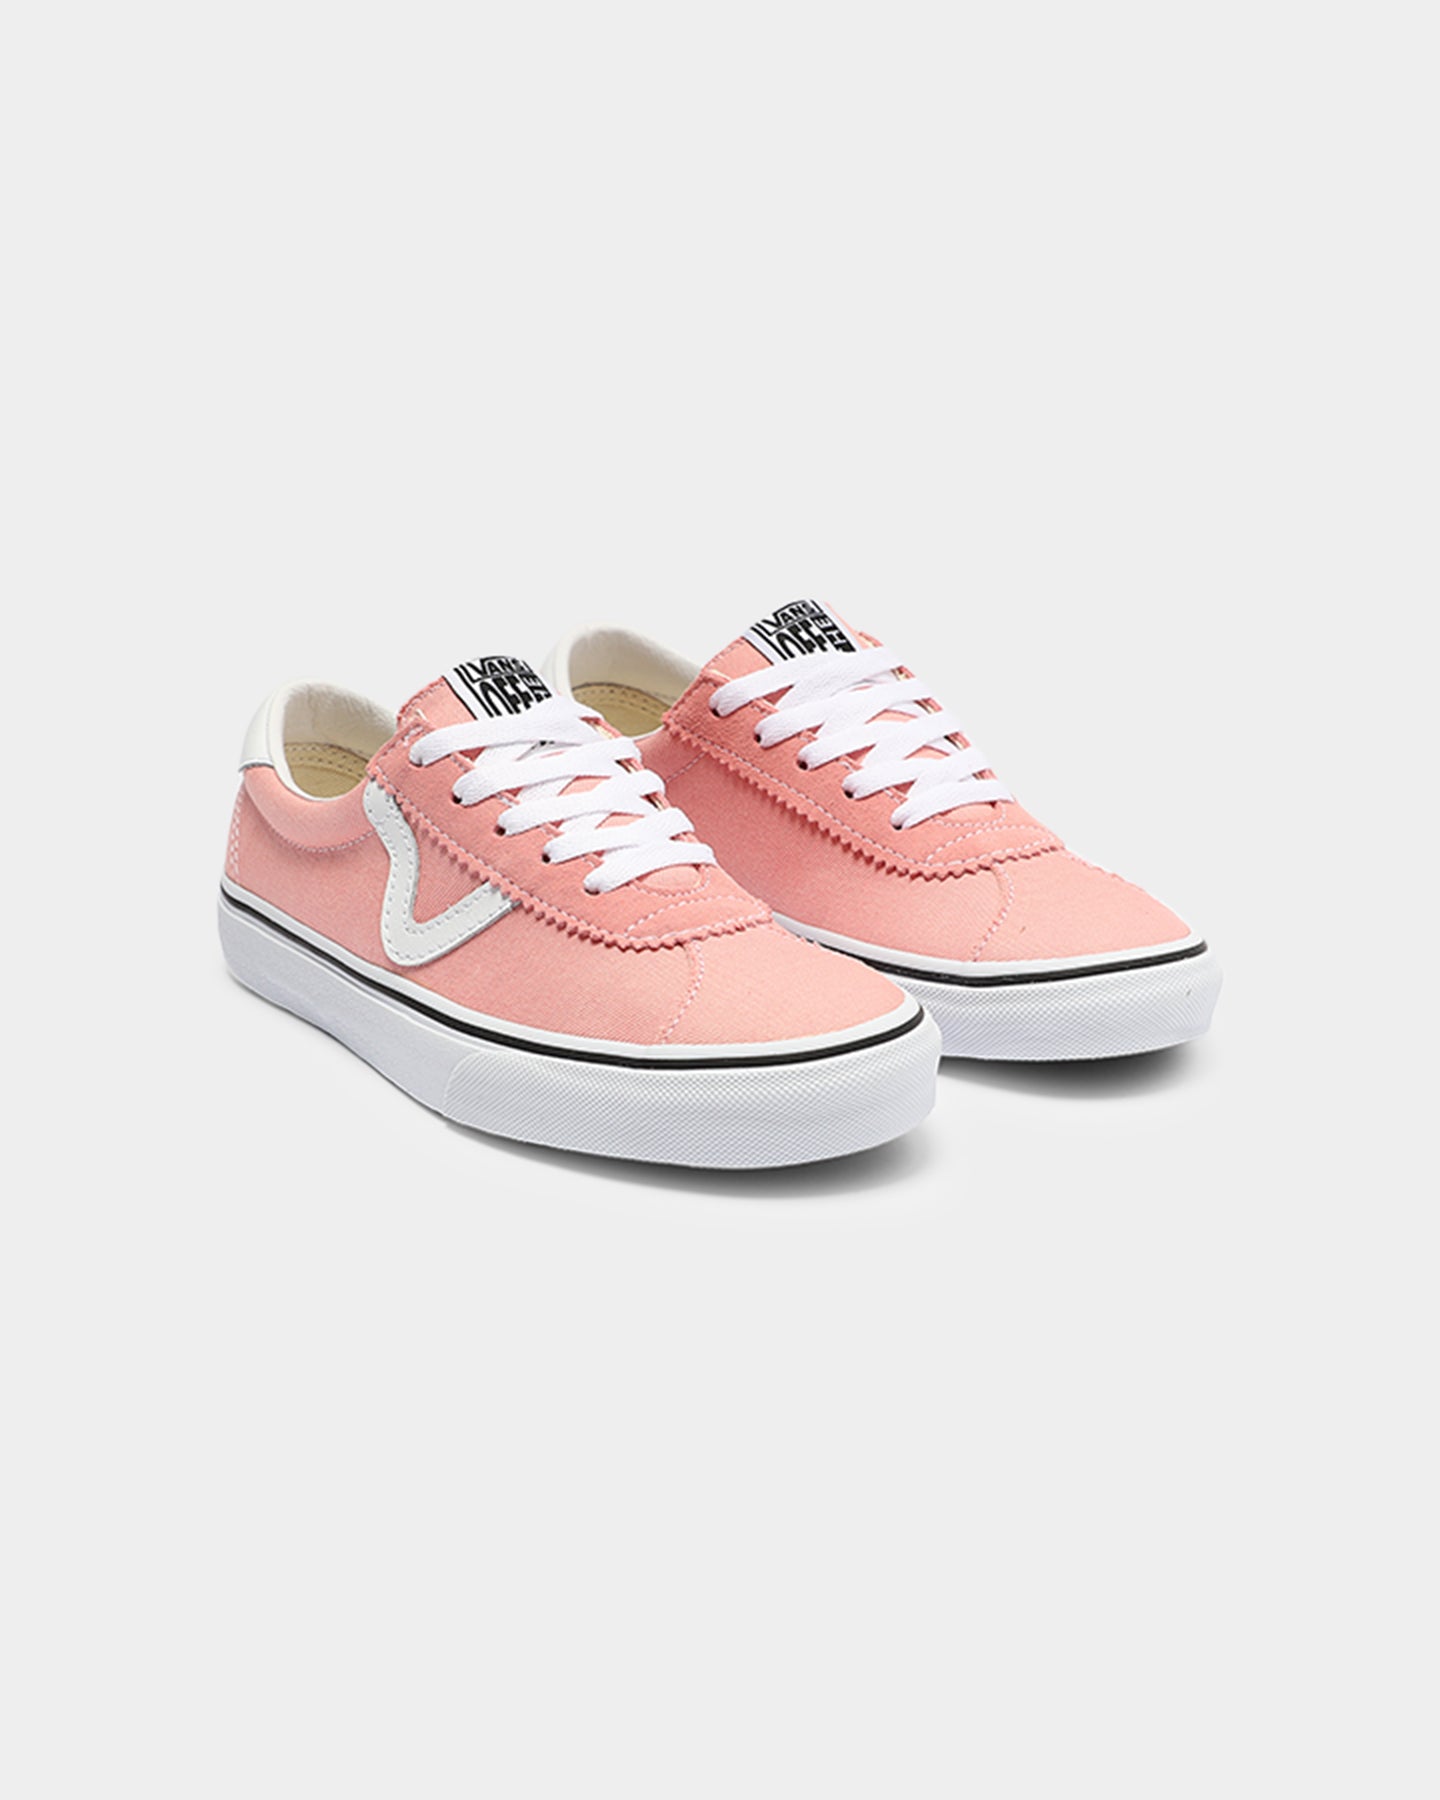 white and pink vans